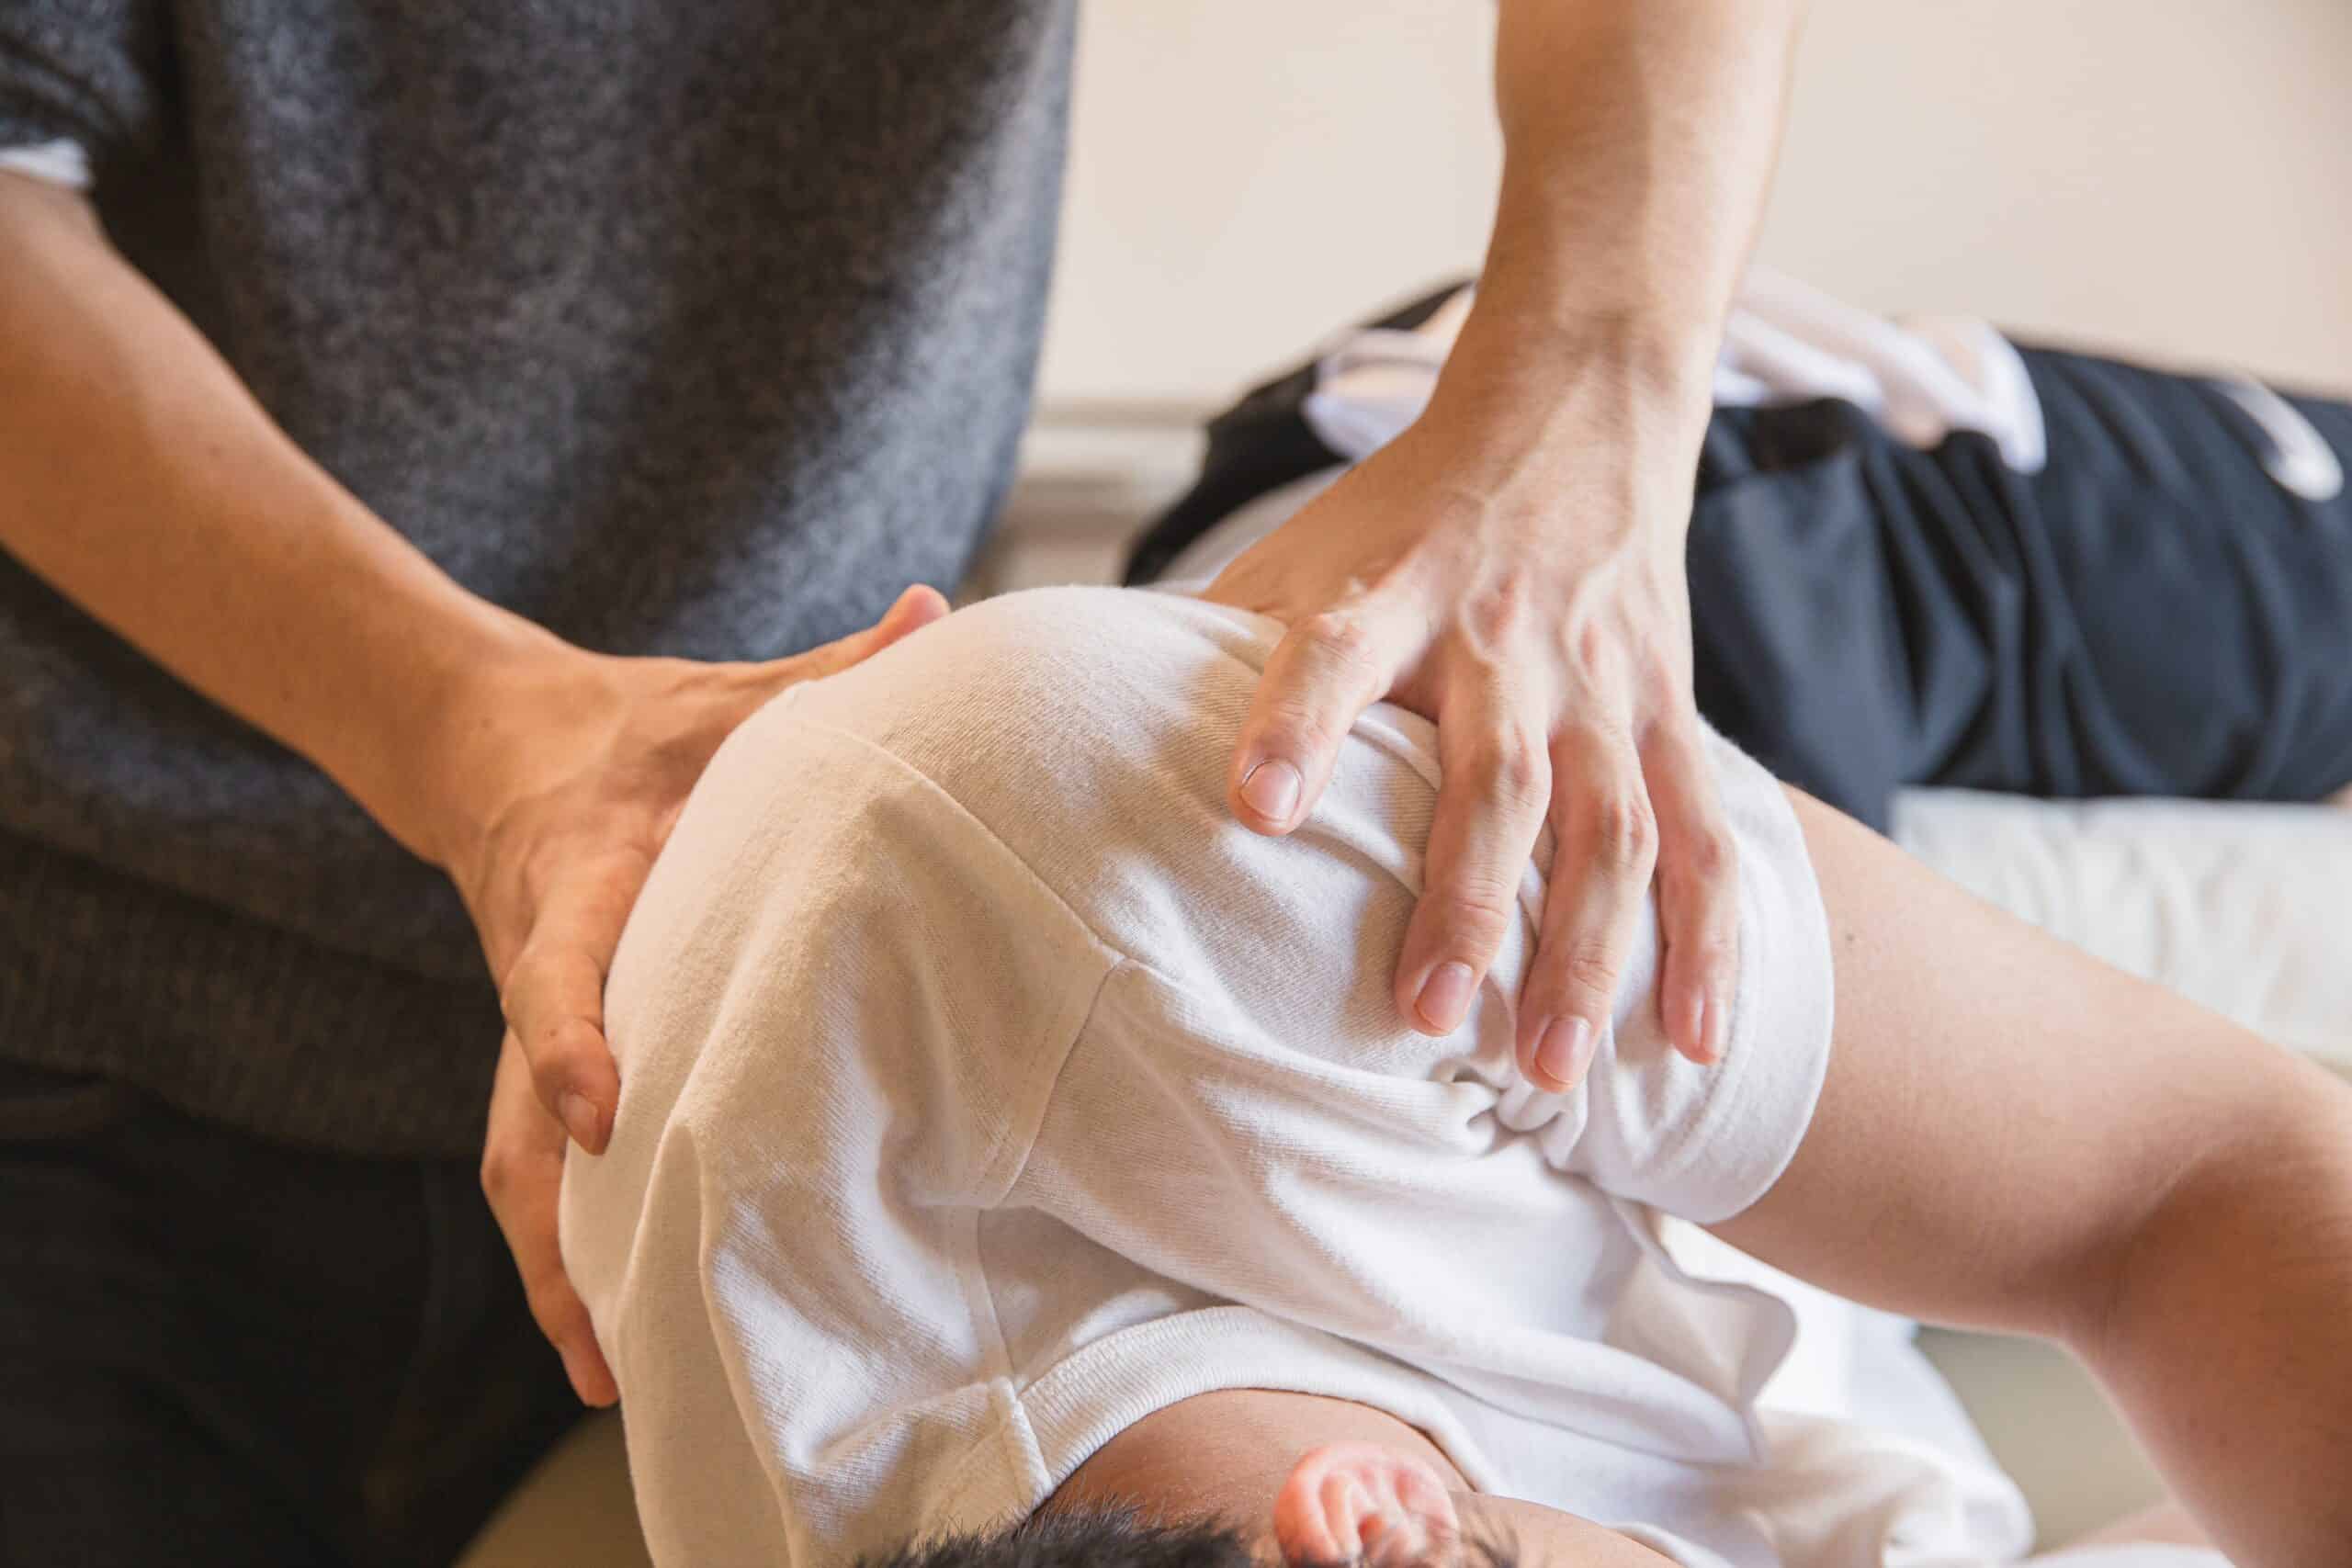 A woman who was experiencing back pain visited a chiropractor.